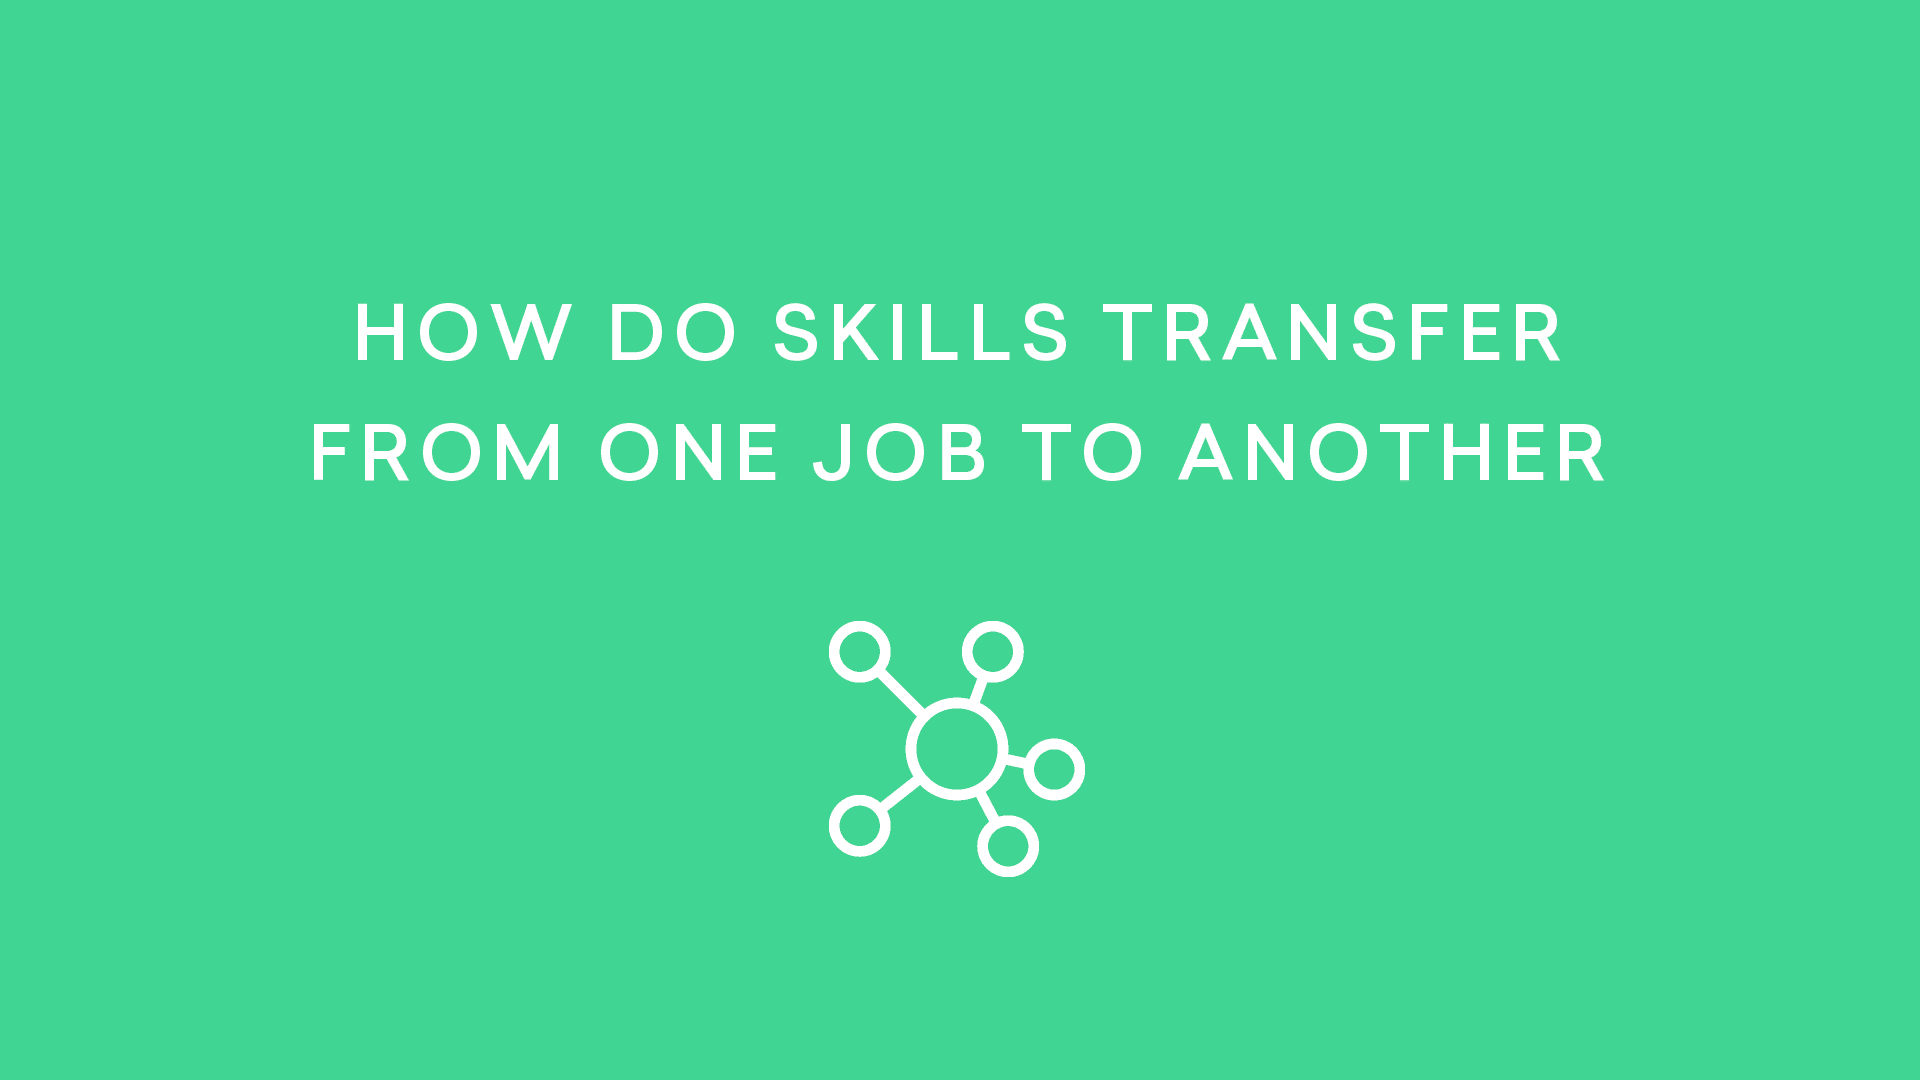 How Do Skills Transfer From One Job to Another?